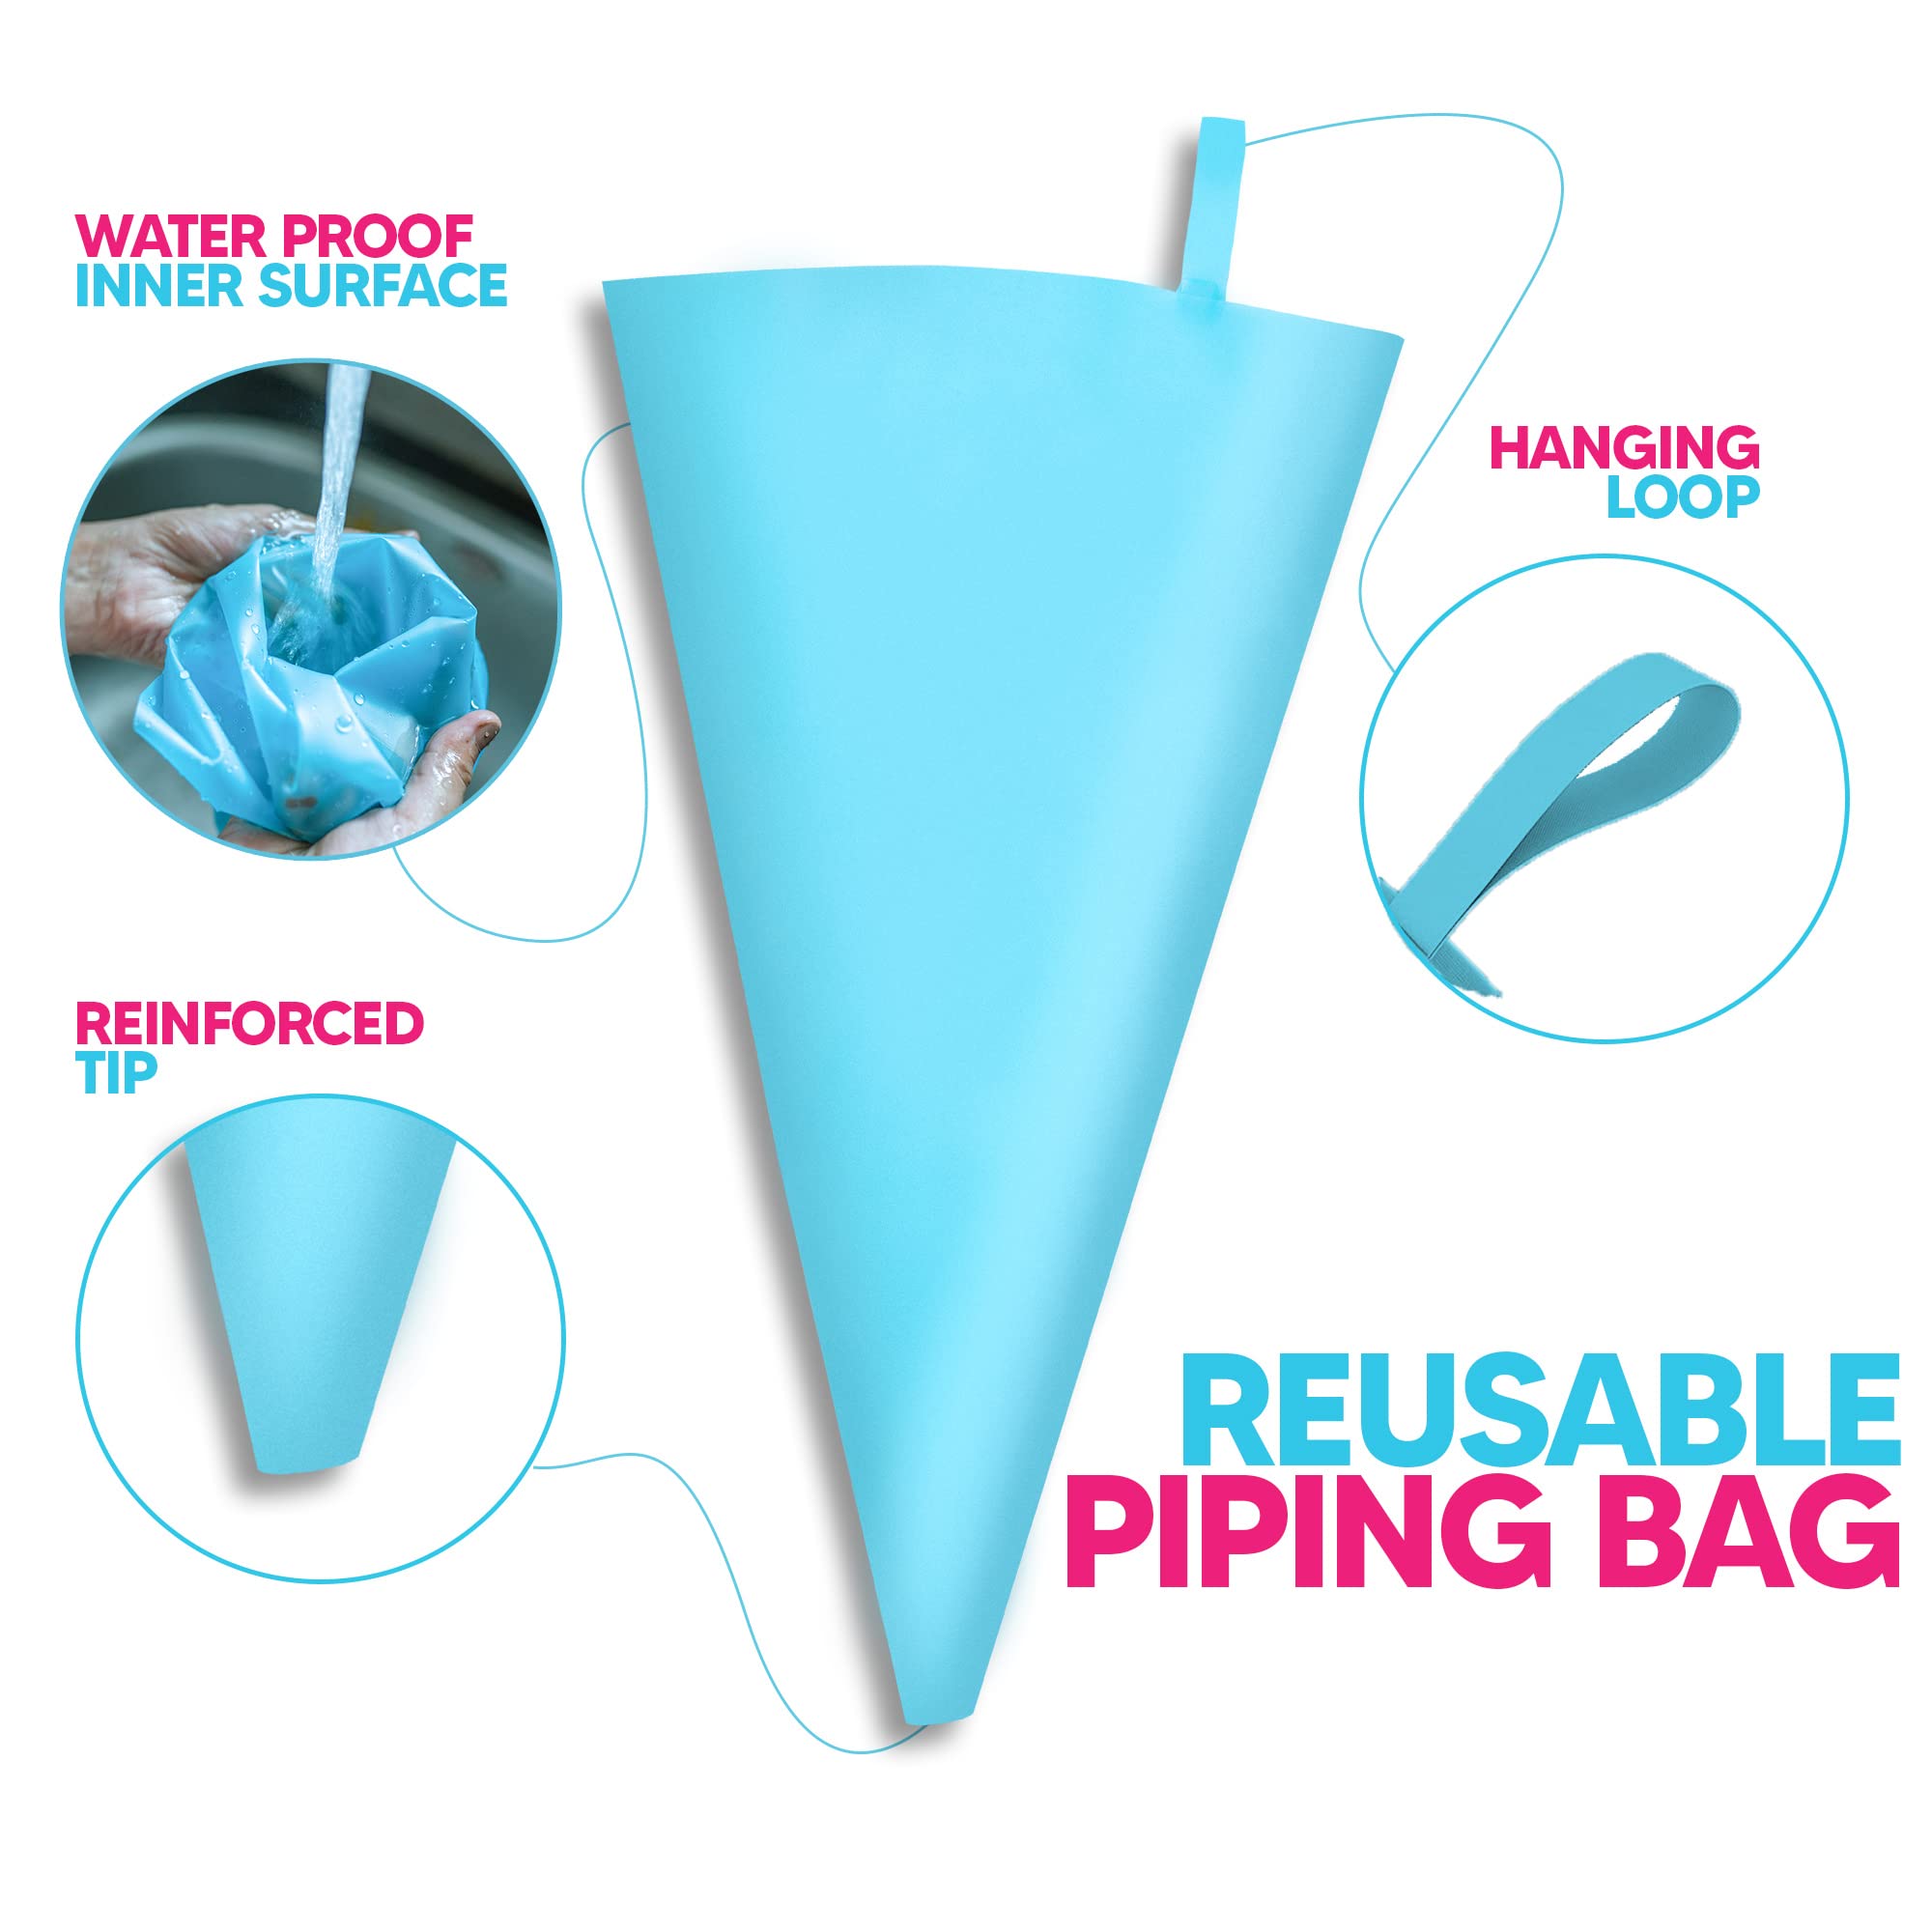 Riccle Reusable Piping Bag and Tips Set - Strong Silicone Icing Bag and Tips - Ideal Icing Piping Kit of 2 Reusable Pastry Bag,2 Coupler, 10 Icing and Frosting Tips with 2 Bag Ties